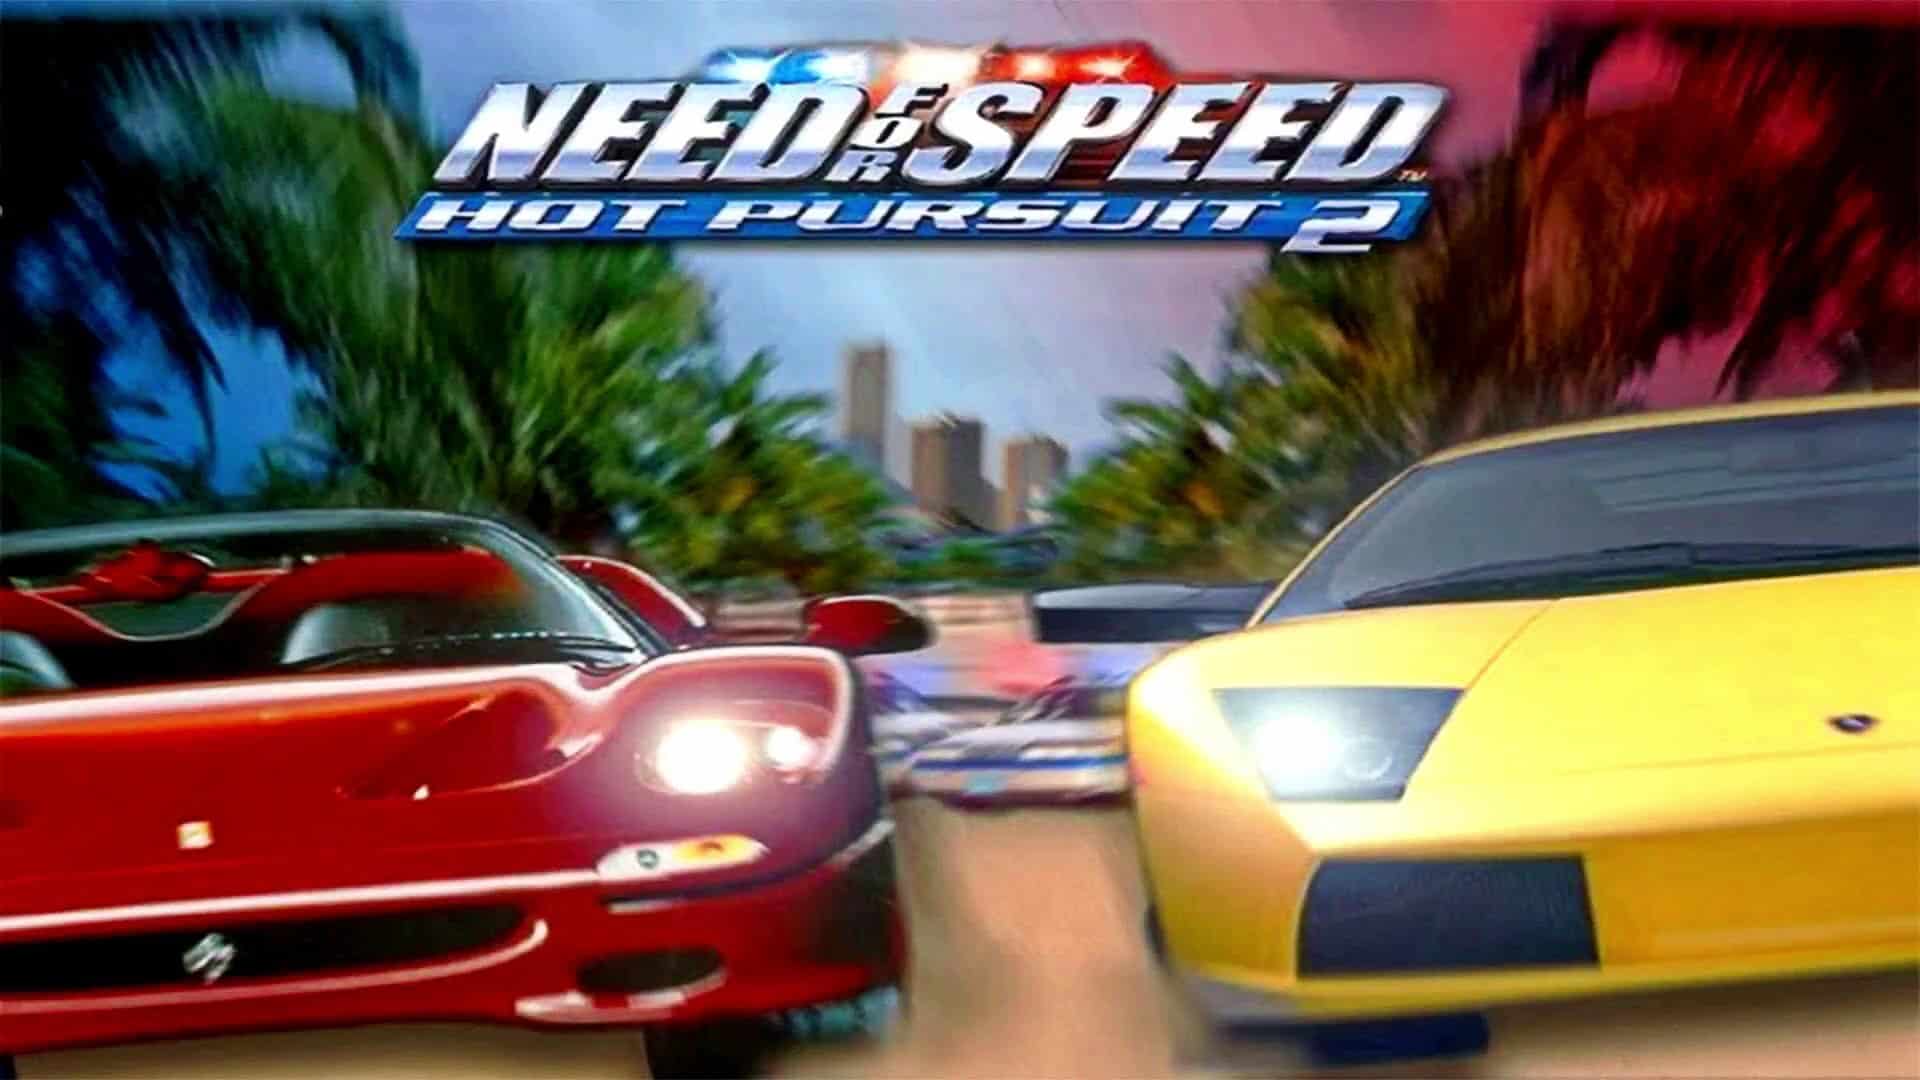 Best Need for Speed Games - Hot Pursuit 2